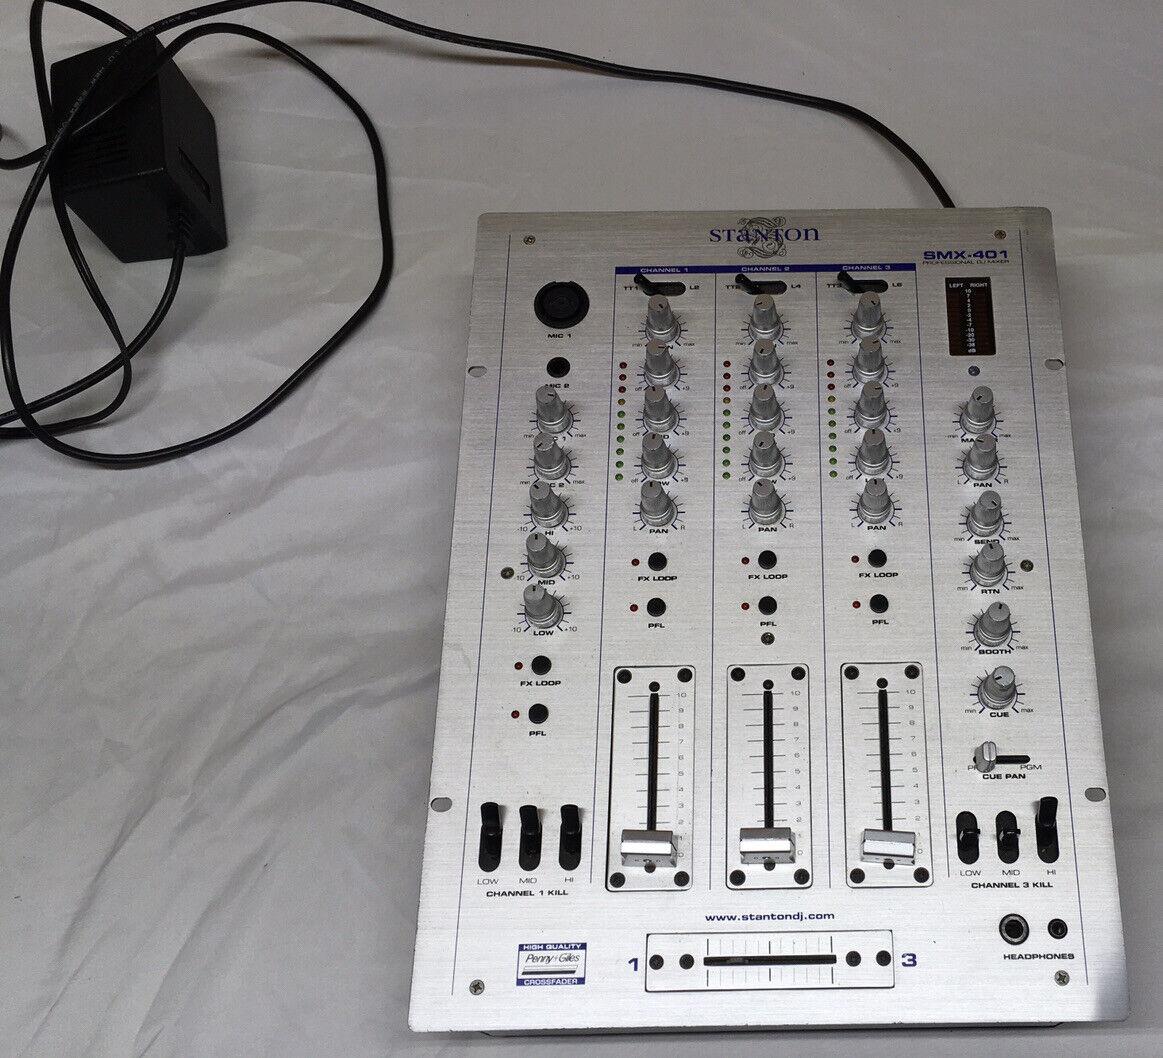 STANTON SMX-401 DJ Mixer Power Very popular! Function Not Max 53% OFF AS- Tested